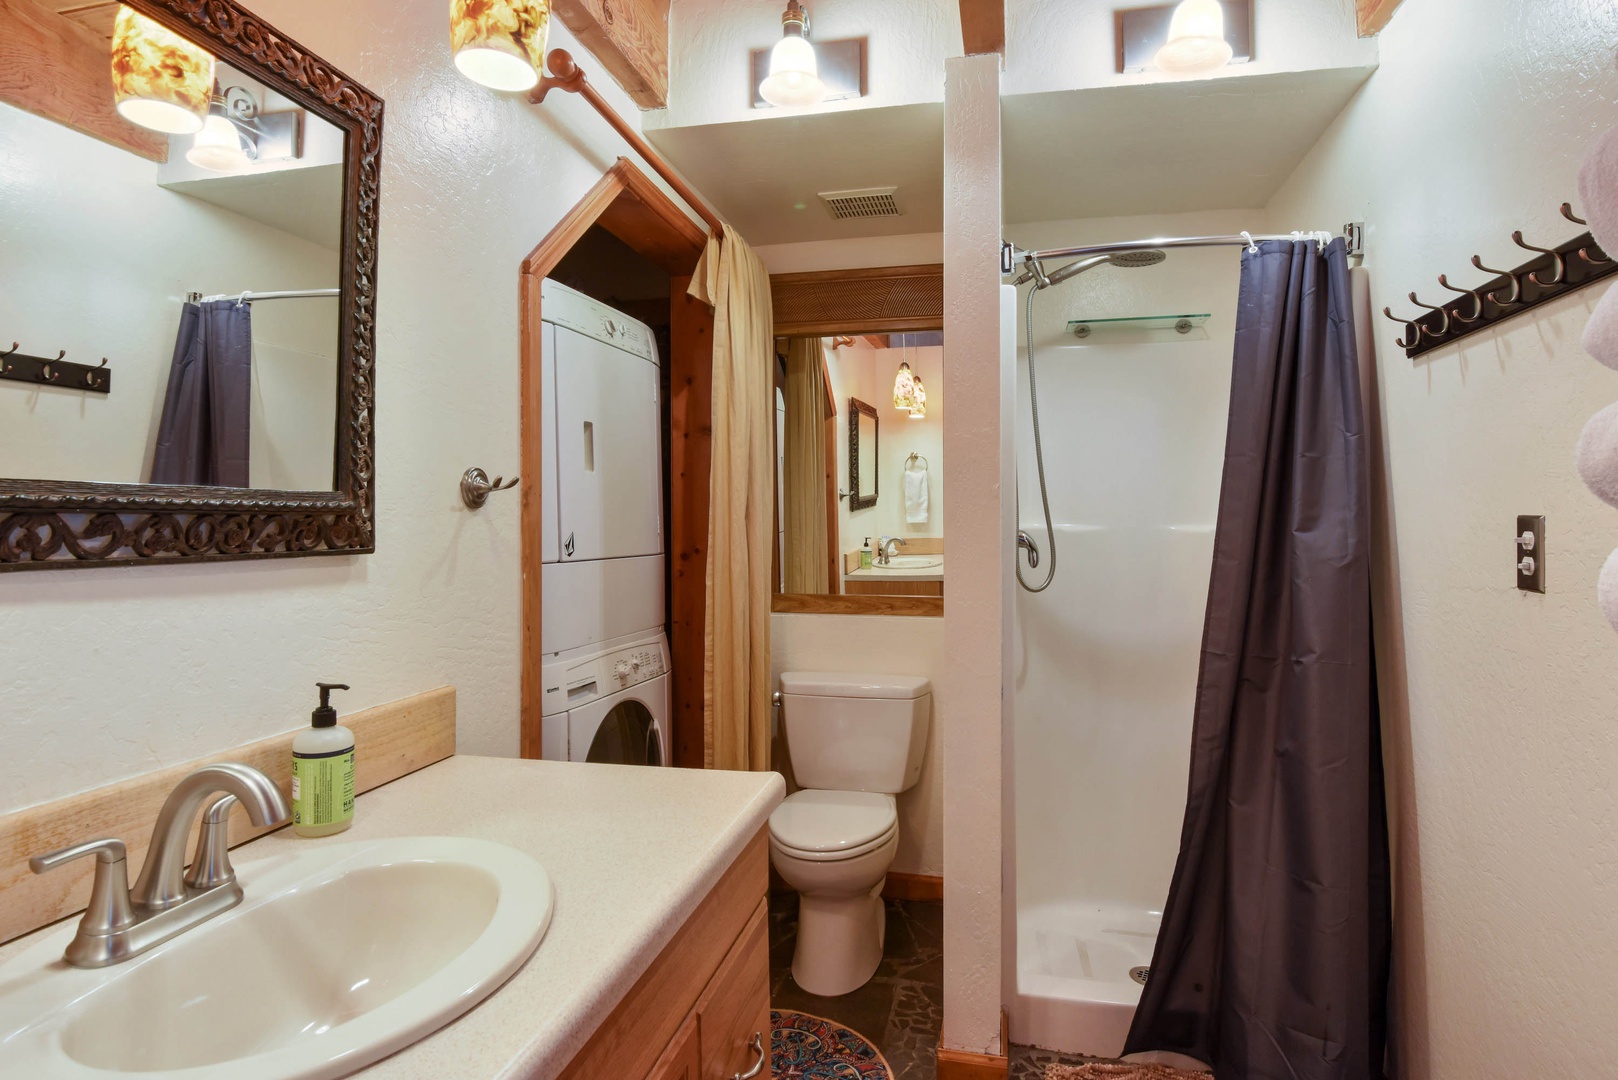 Full bathroom with standing shower, washer and dryer